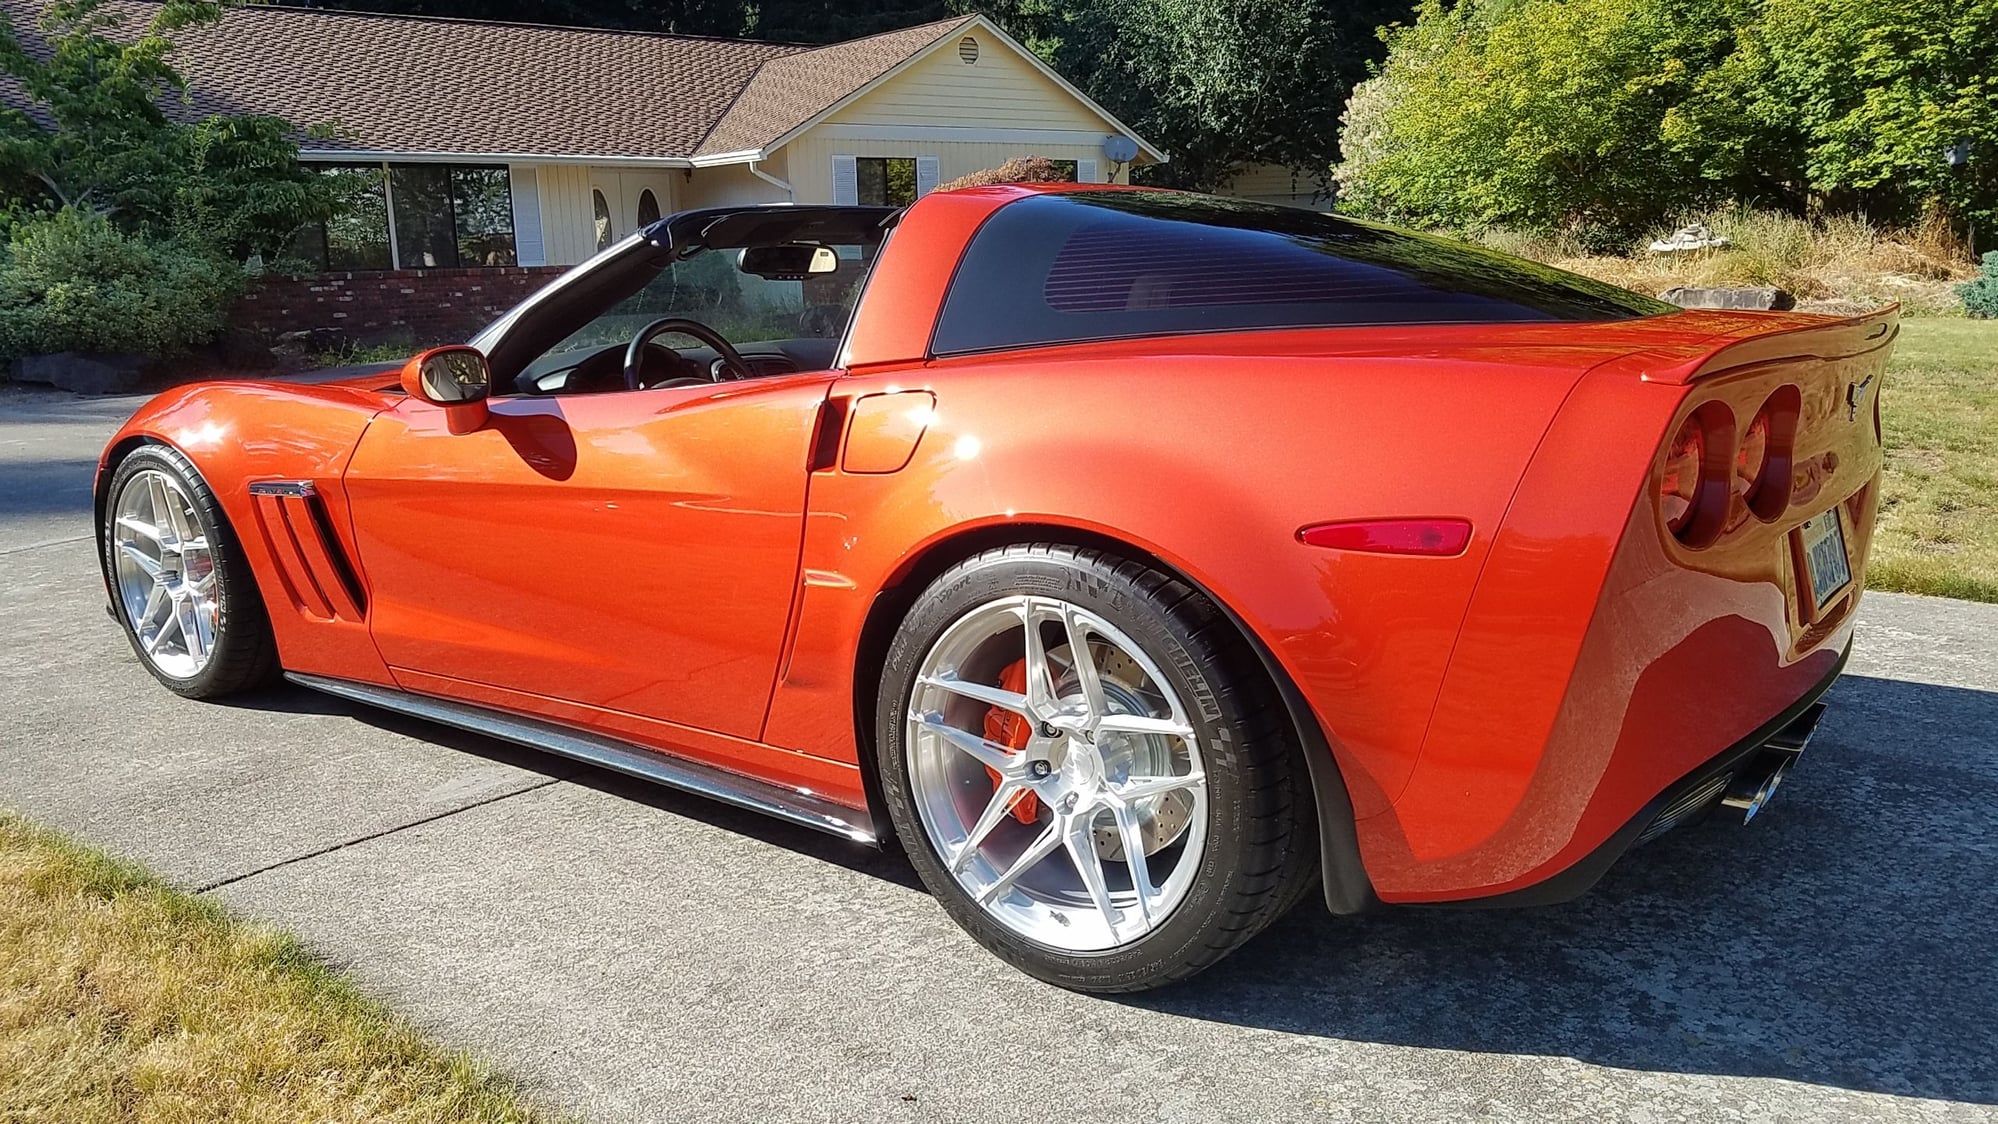 Reasonable price for paint correction, PPF, and 3- year ...